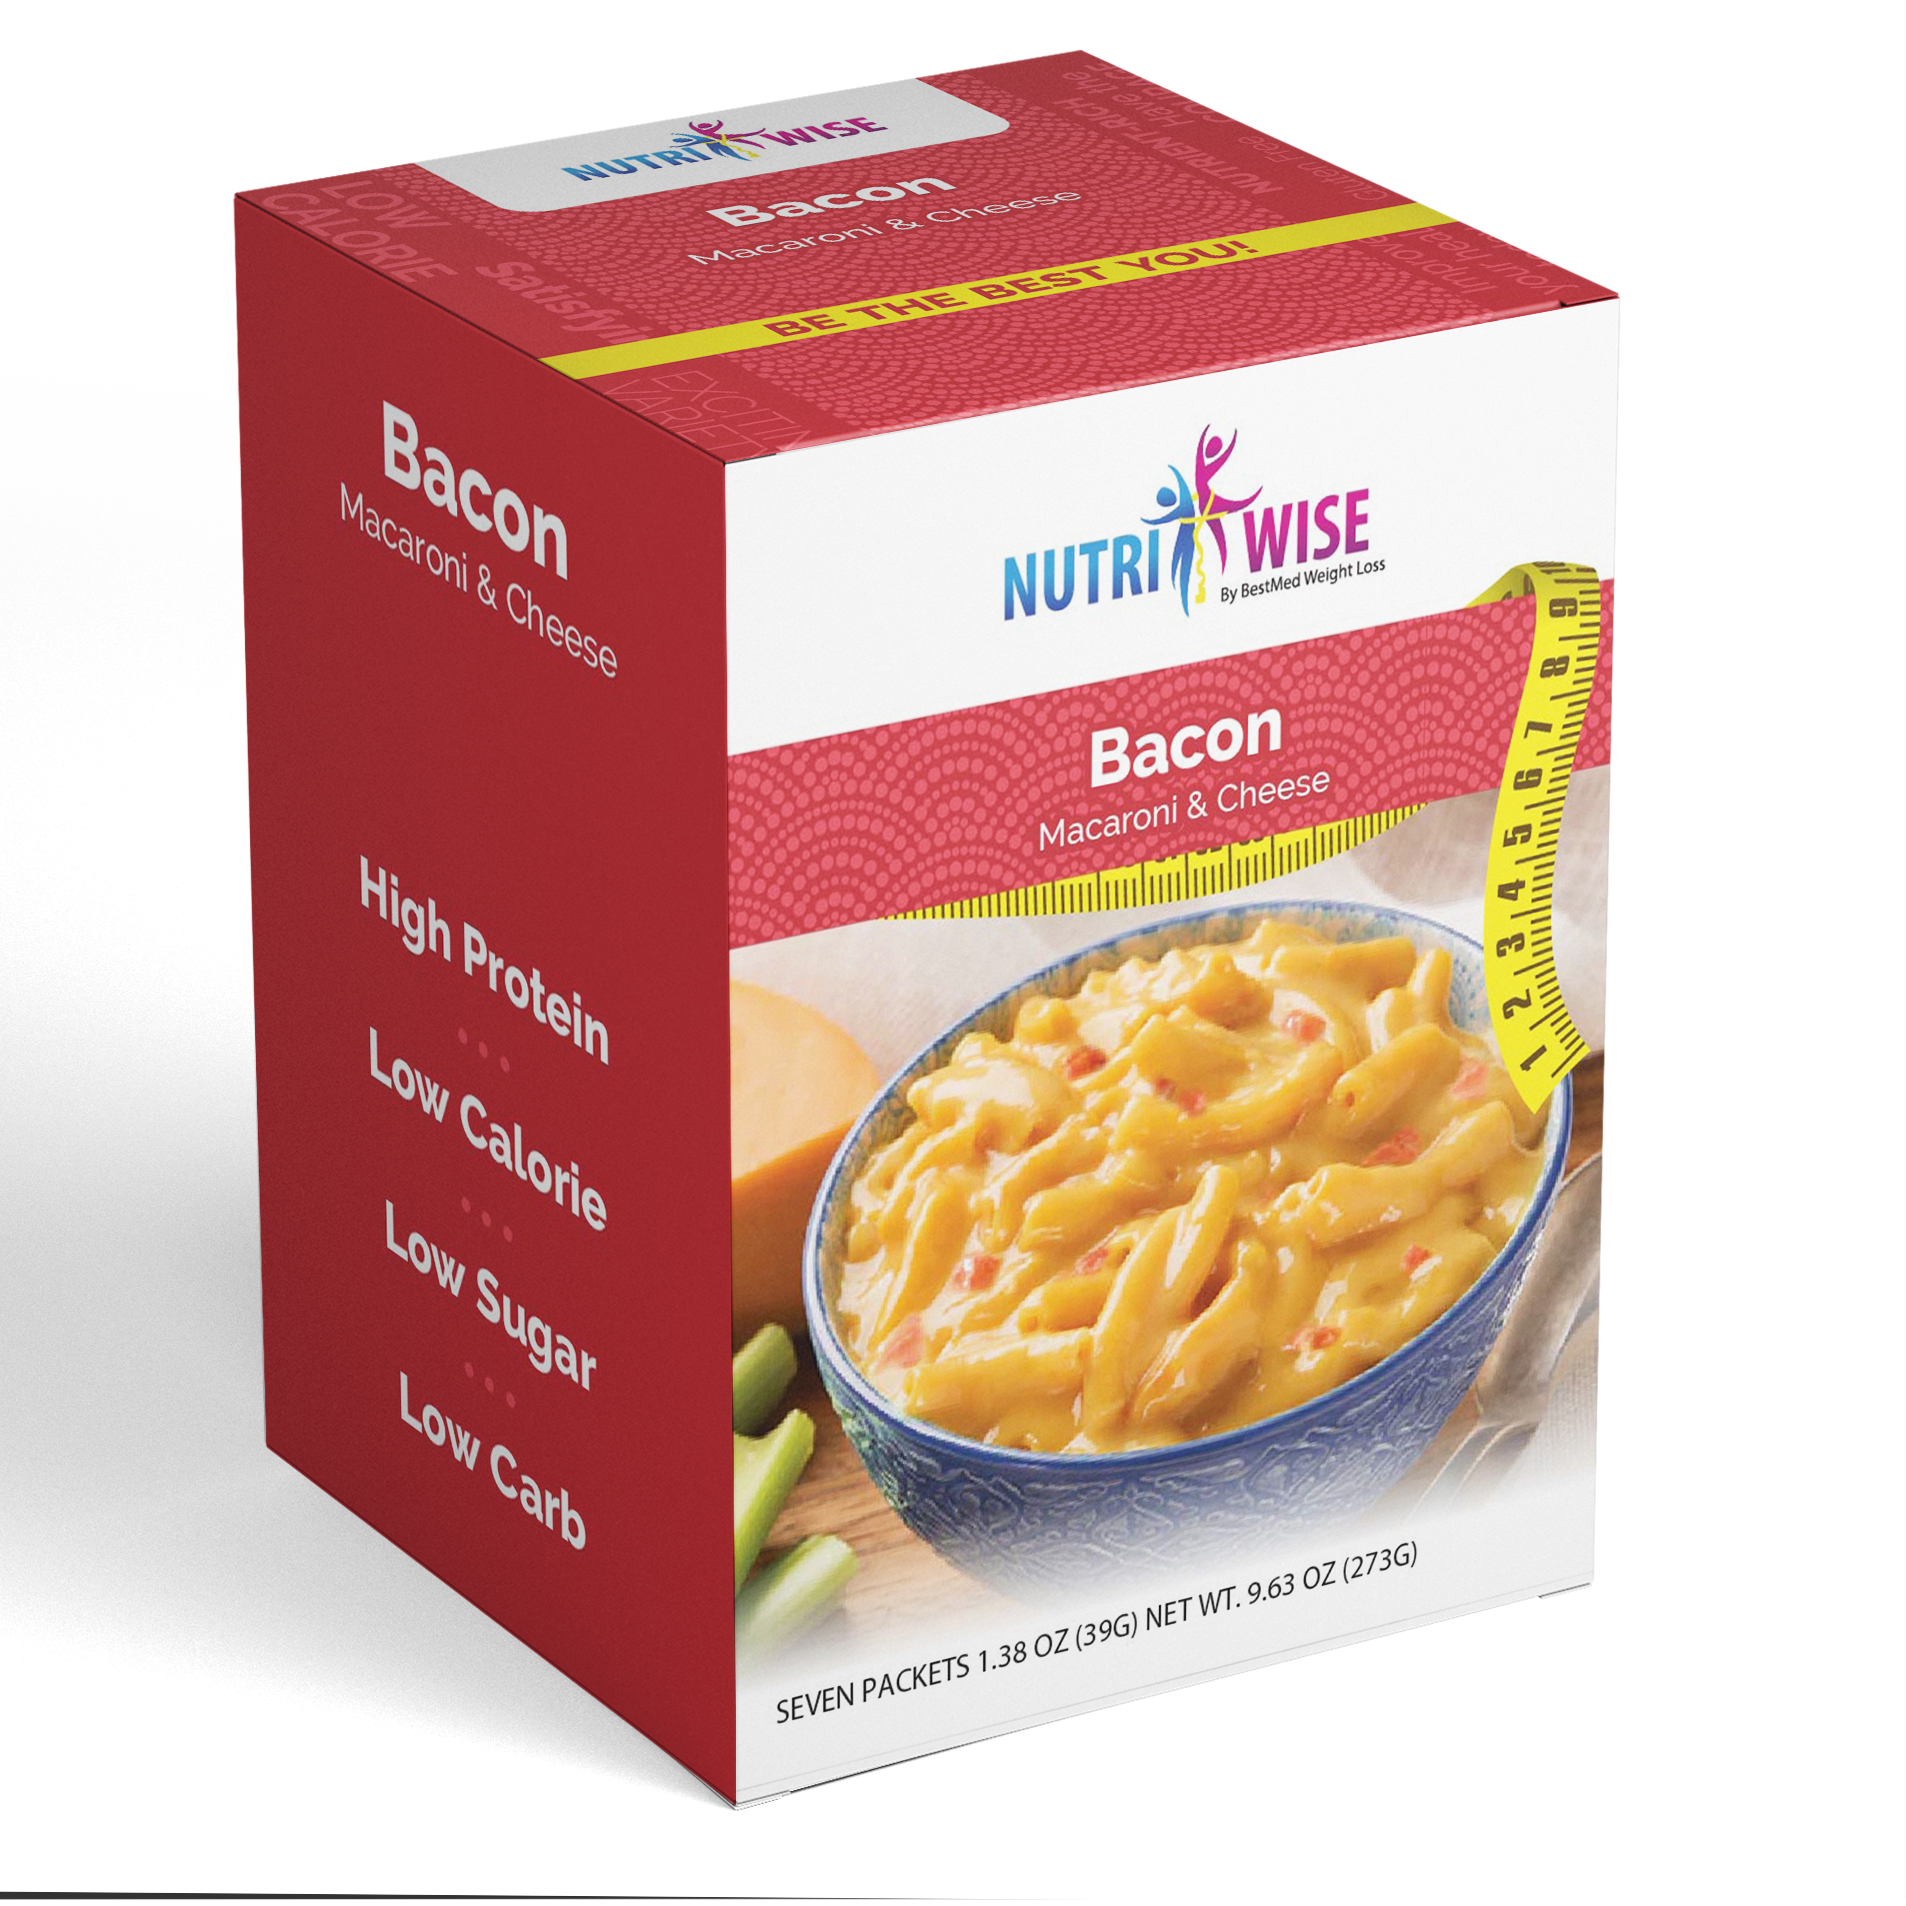 NutriWise - Bacon Macaroni & Cheese (7/Box) - Doctors Weight Loss